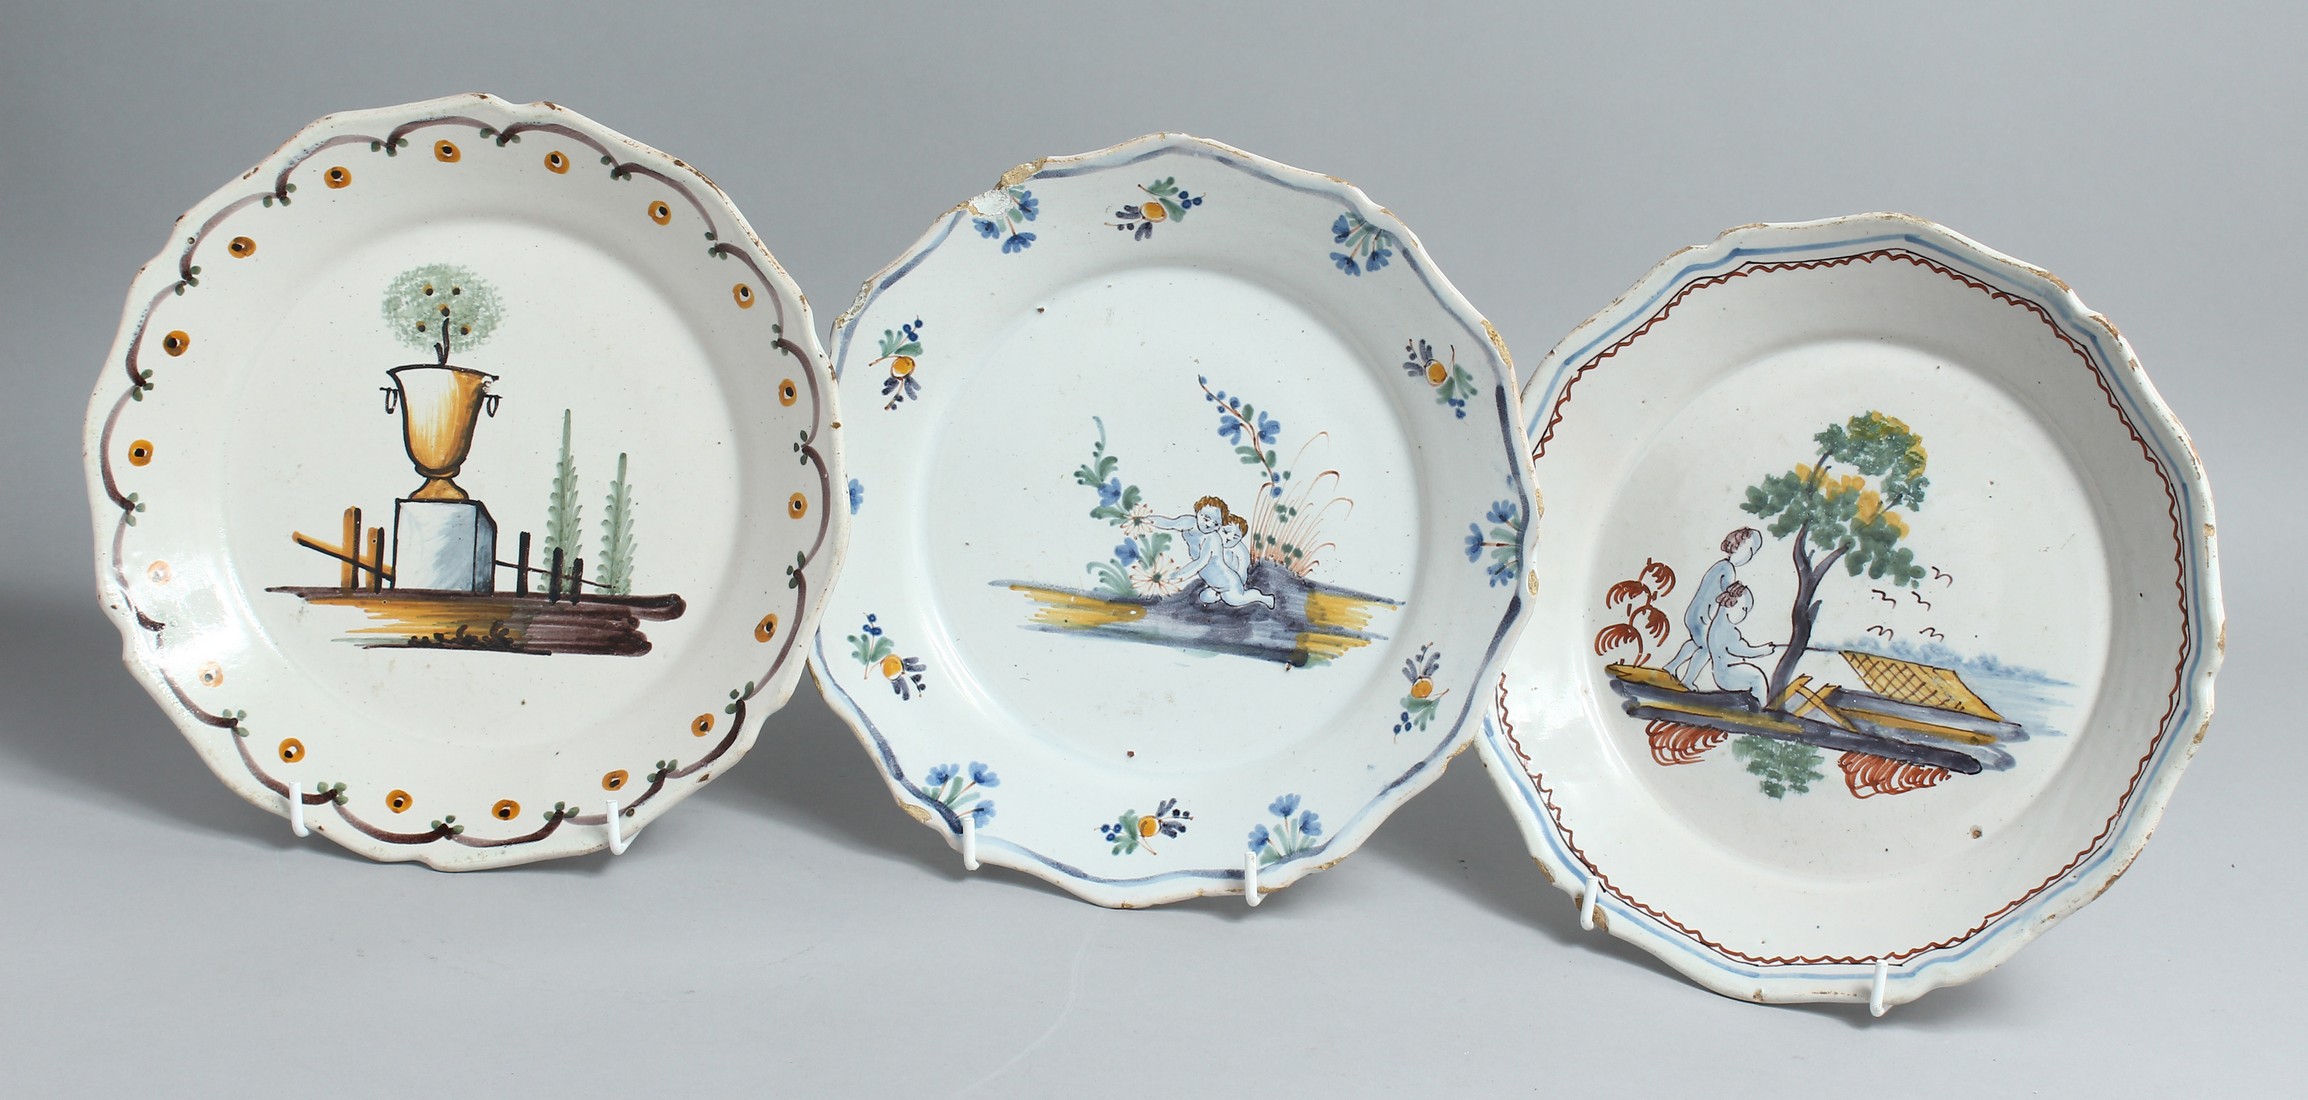 THREE 18TH CENTURY FAIENCE PLATES two with chickens, one with an urn. 8ins diameter.